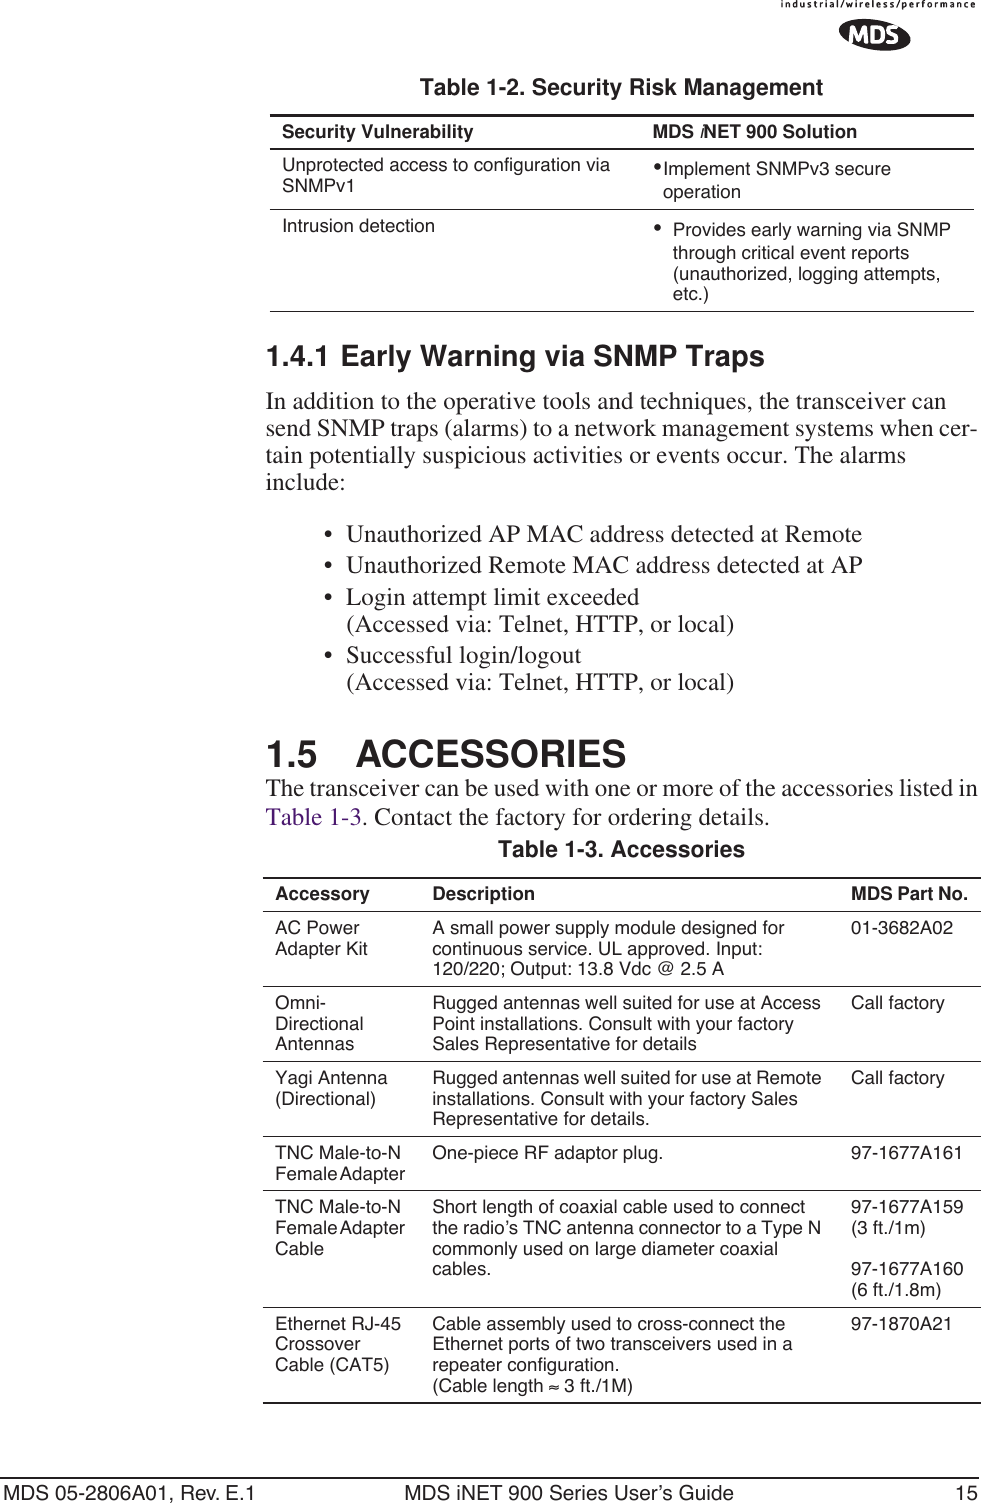 MDS 05-2806A01, Rev. E.1 MDS iNET 900 Series User’s Guide 151.4.1 Early Warning via SNMP TrapsIn addition to the operative tools and techniques, the transceiver can send SNMP traps (alarms) to a network management systems when cer-tain potentially suspicious activities or events occur. The alarms include:• Unauthorized AP MAC address detected at Remote• Unauthorized Remote MAC address detected at AP• Login attempt limit exceeded (Accessed via: Telnet, HTTP, or local)• Successful login/logout (Accessed via: Telnet, HTTP, or local)1.5 ACCESSORIESThe transceiver can be used with one or more of the accessories listed inTable 1-3. Contact the factory for ordering details.Unprotected access to configuration via SNMPv1 •Implement SNMPv3 secure operationIntrusion detection •Provides early warning via SNMP through critical event reports (unauthorized, logging attempts, etc.)Table 1-2. Security Risk ManagementSecurity Vulnerability MDS iNET 900 SolutionTable 1-3. AccessoriesAccessory Description MDS Part No.AC Power Adapter KitA small power supply module designed for continuous service. UL approved. Input: 120/220; Output: 13.8 Vdc @ 2.5 A01-3682A02Omni- Directional AntennasRugged antennas well suited for use at Access Point installations. Consult with your factory Sales Representative for detailsCall factoryYagi Antenna(Directional)Rugged antennas well suited for use at Remote installations. Consult with your factory Sales Representative for details.Call factoryTNC Male-to-N Female Adapter One-piece RF adaptor plug. 97-1677A161TNC Male-to-N Female Adapter CableShort length of coaxial cable used to connect the radio’s TNC antenna connector to a Type N commonly used on large diameter coaxial cables.97-1677A159(3 ft./1m)97-1677A160(6 ft./1.8m)Ethernet RJ-45 Crossover Cable (CAT5)Cable assembly used to cross-connect the Ethernet ports of two transceivers used in a repeater configuration. (Cable length ≈ 3 ft./1M)97-1870A21